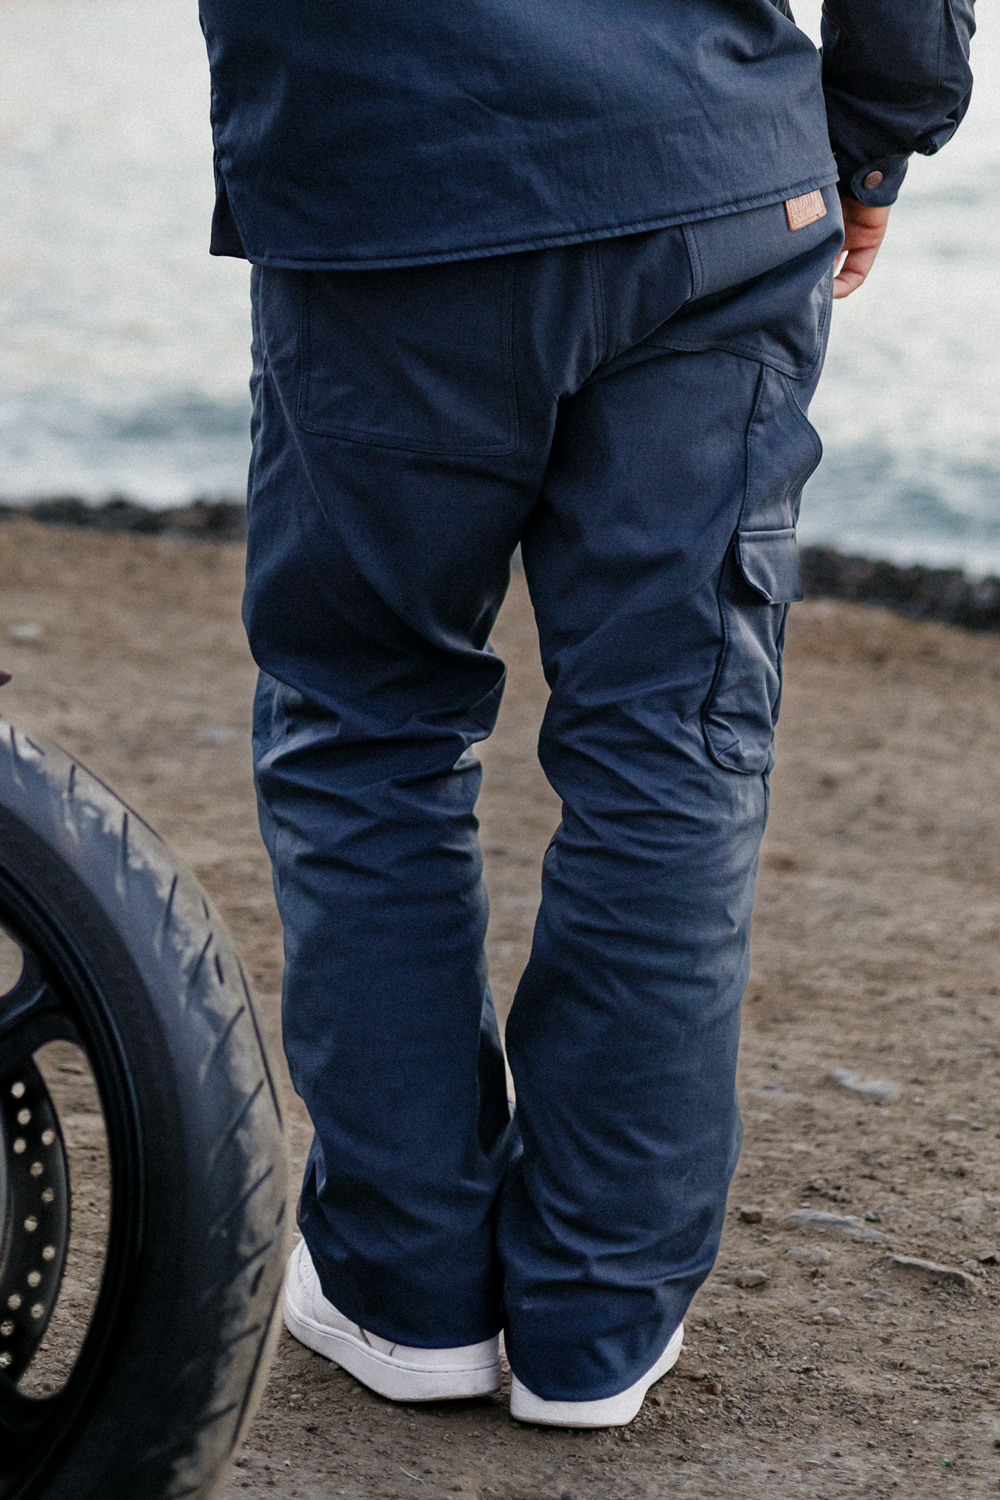 A Motorcycle Rider wearing North of Berlin wingman trousers